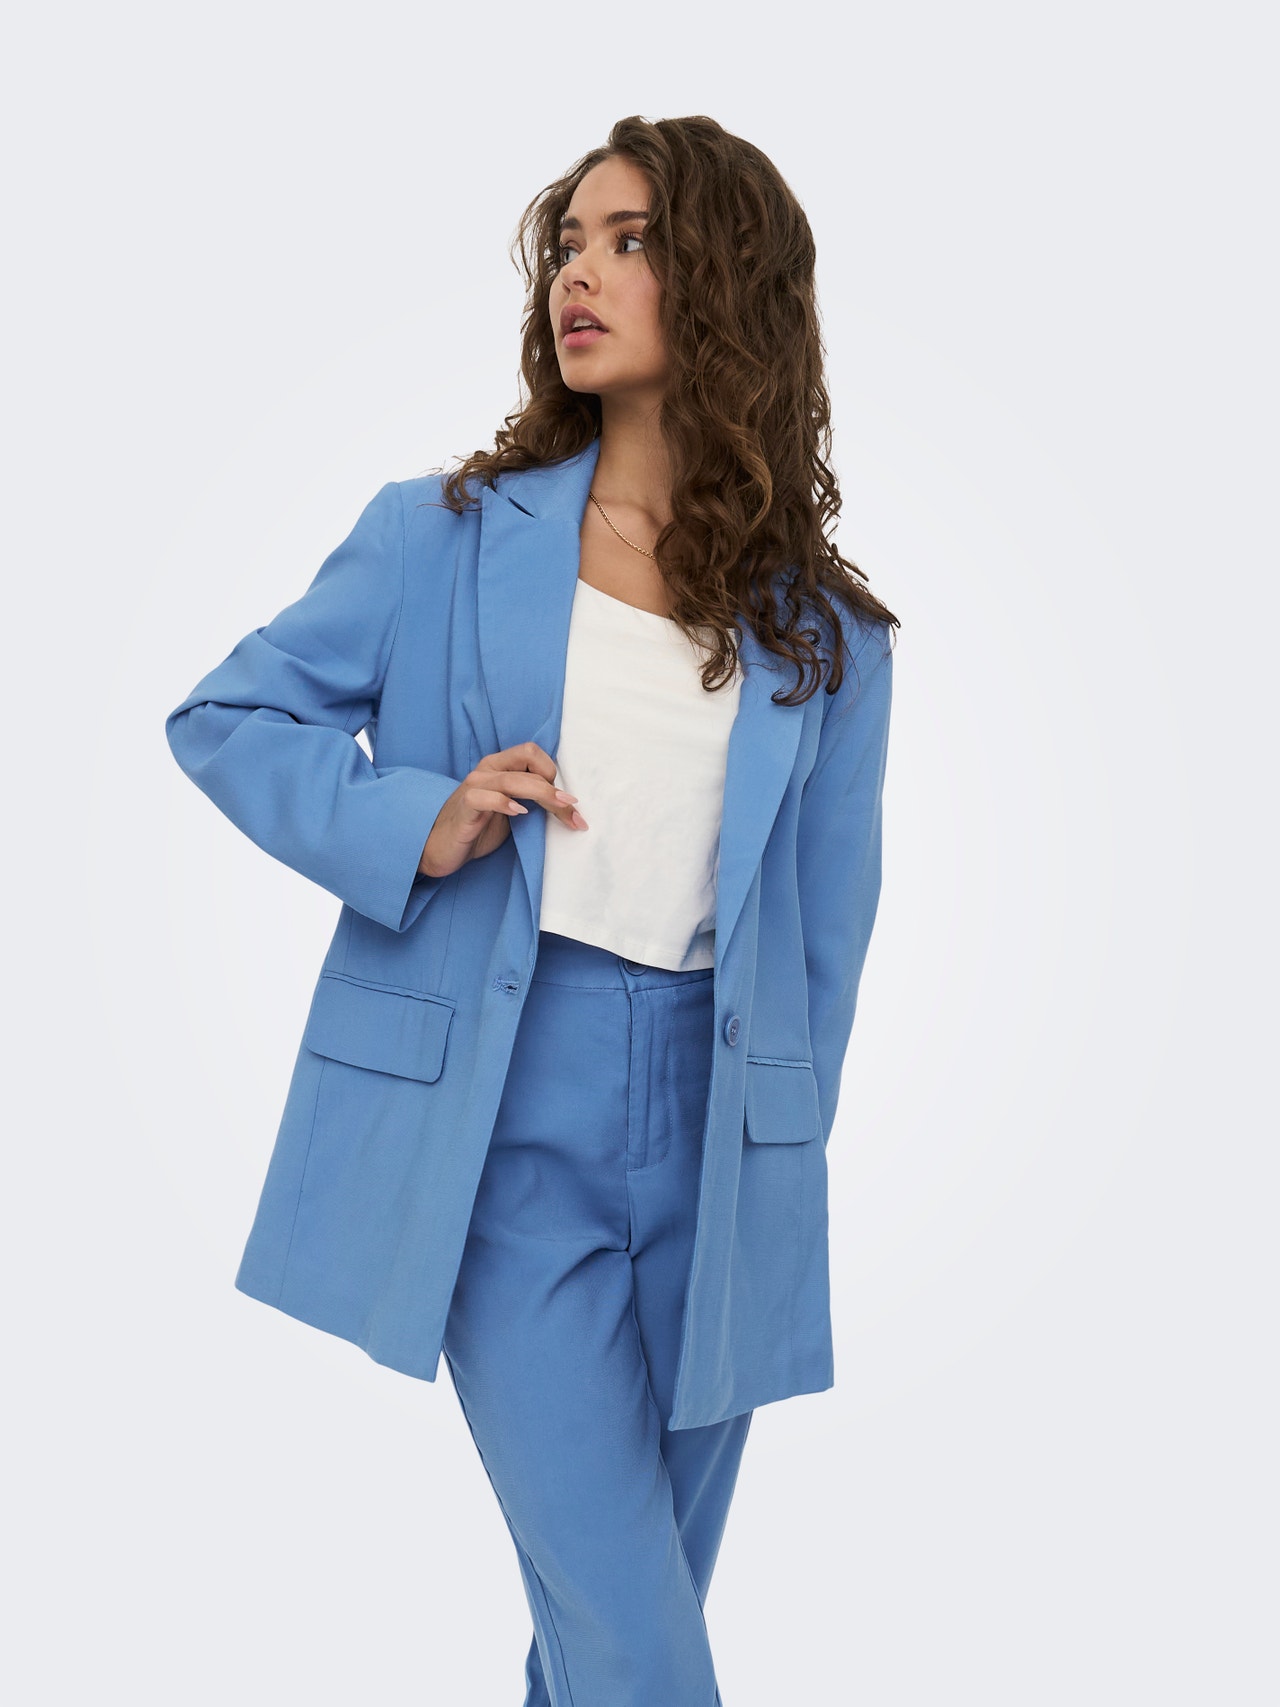 ONLY Loose Fit Blazer -Provence - 15283602